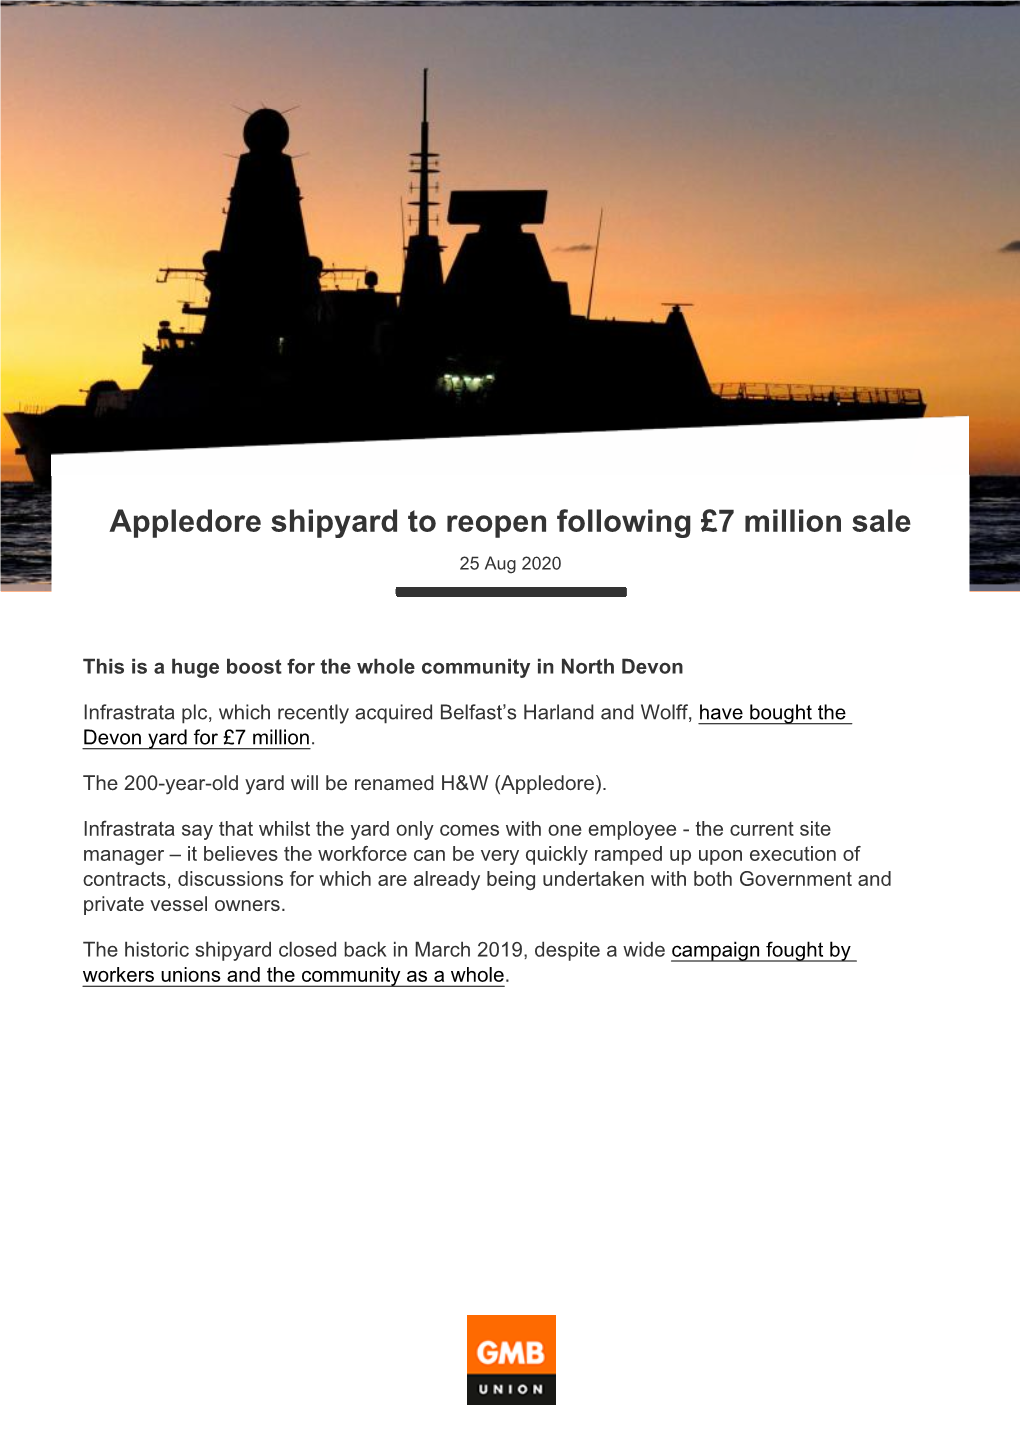 Appledore Shipyard to Reopen Following £7 Million Sale 25 Aug 2020